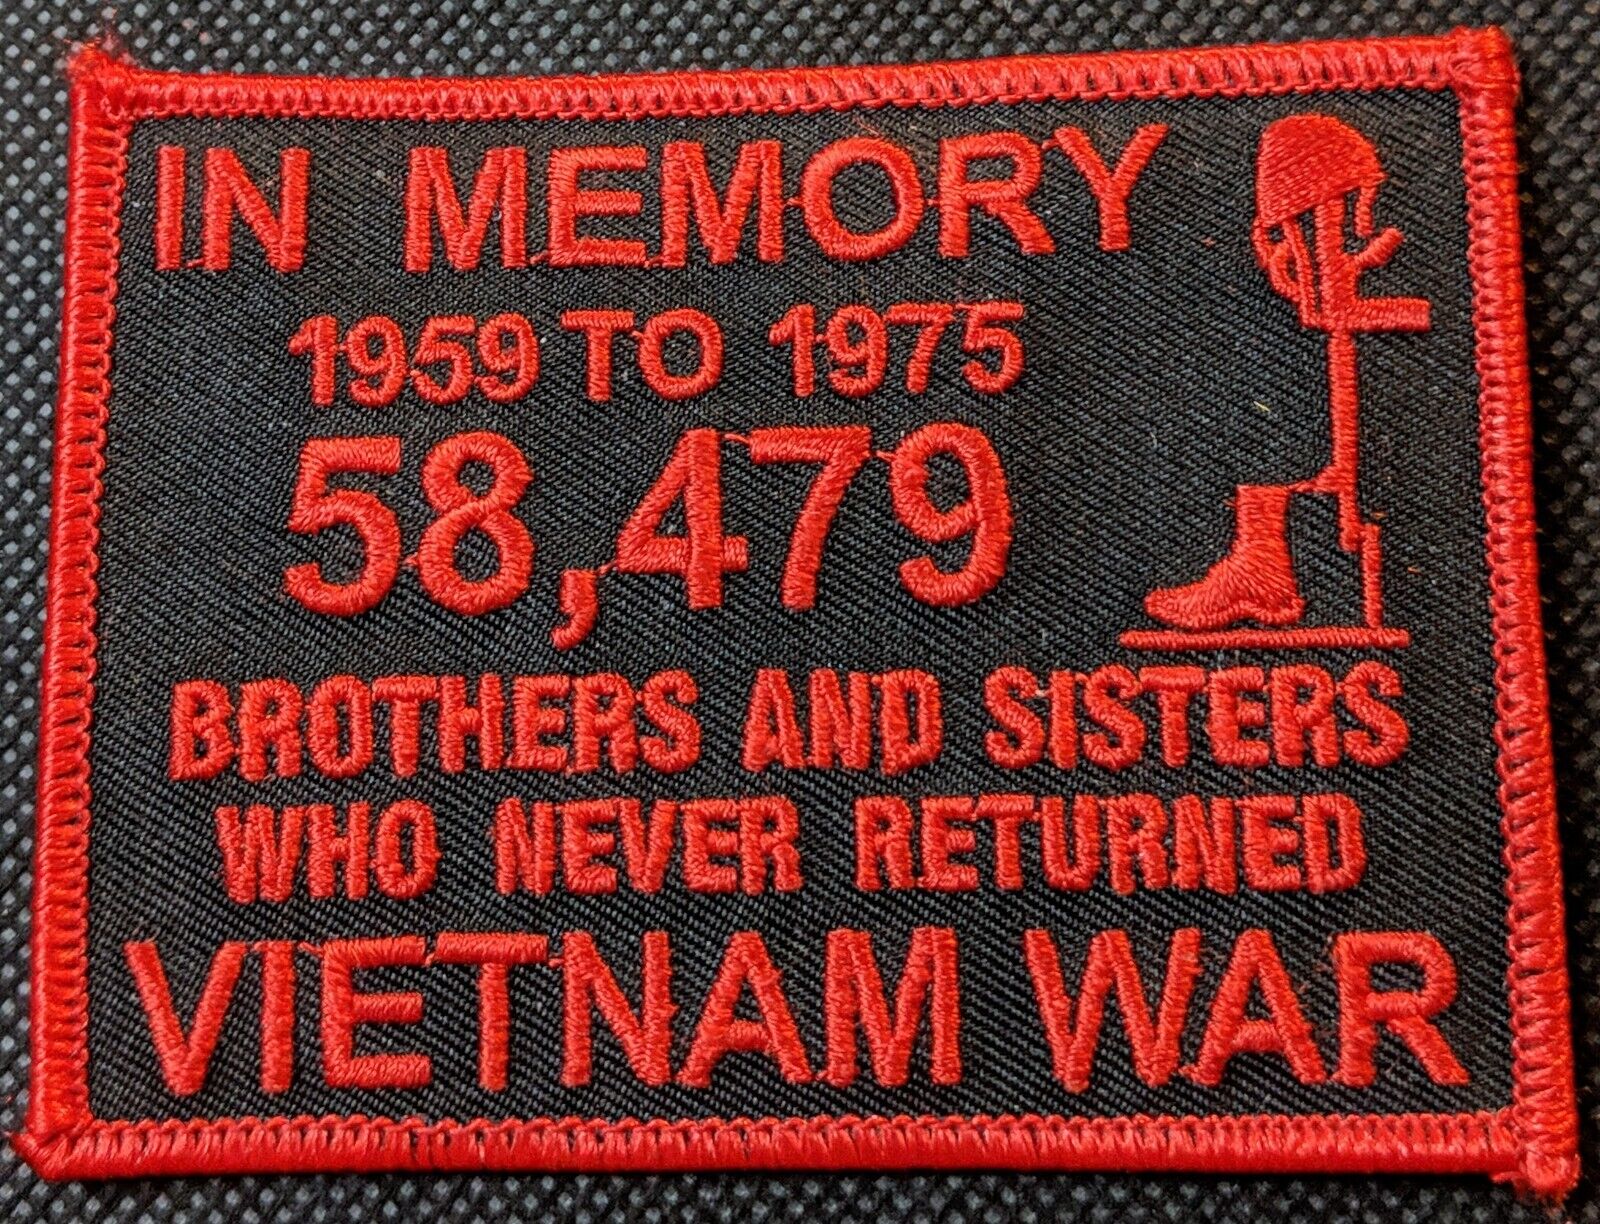 In Memory 58,479 Vietnam Brothers Red Embroidered Biker Patch